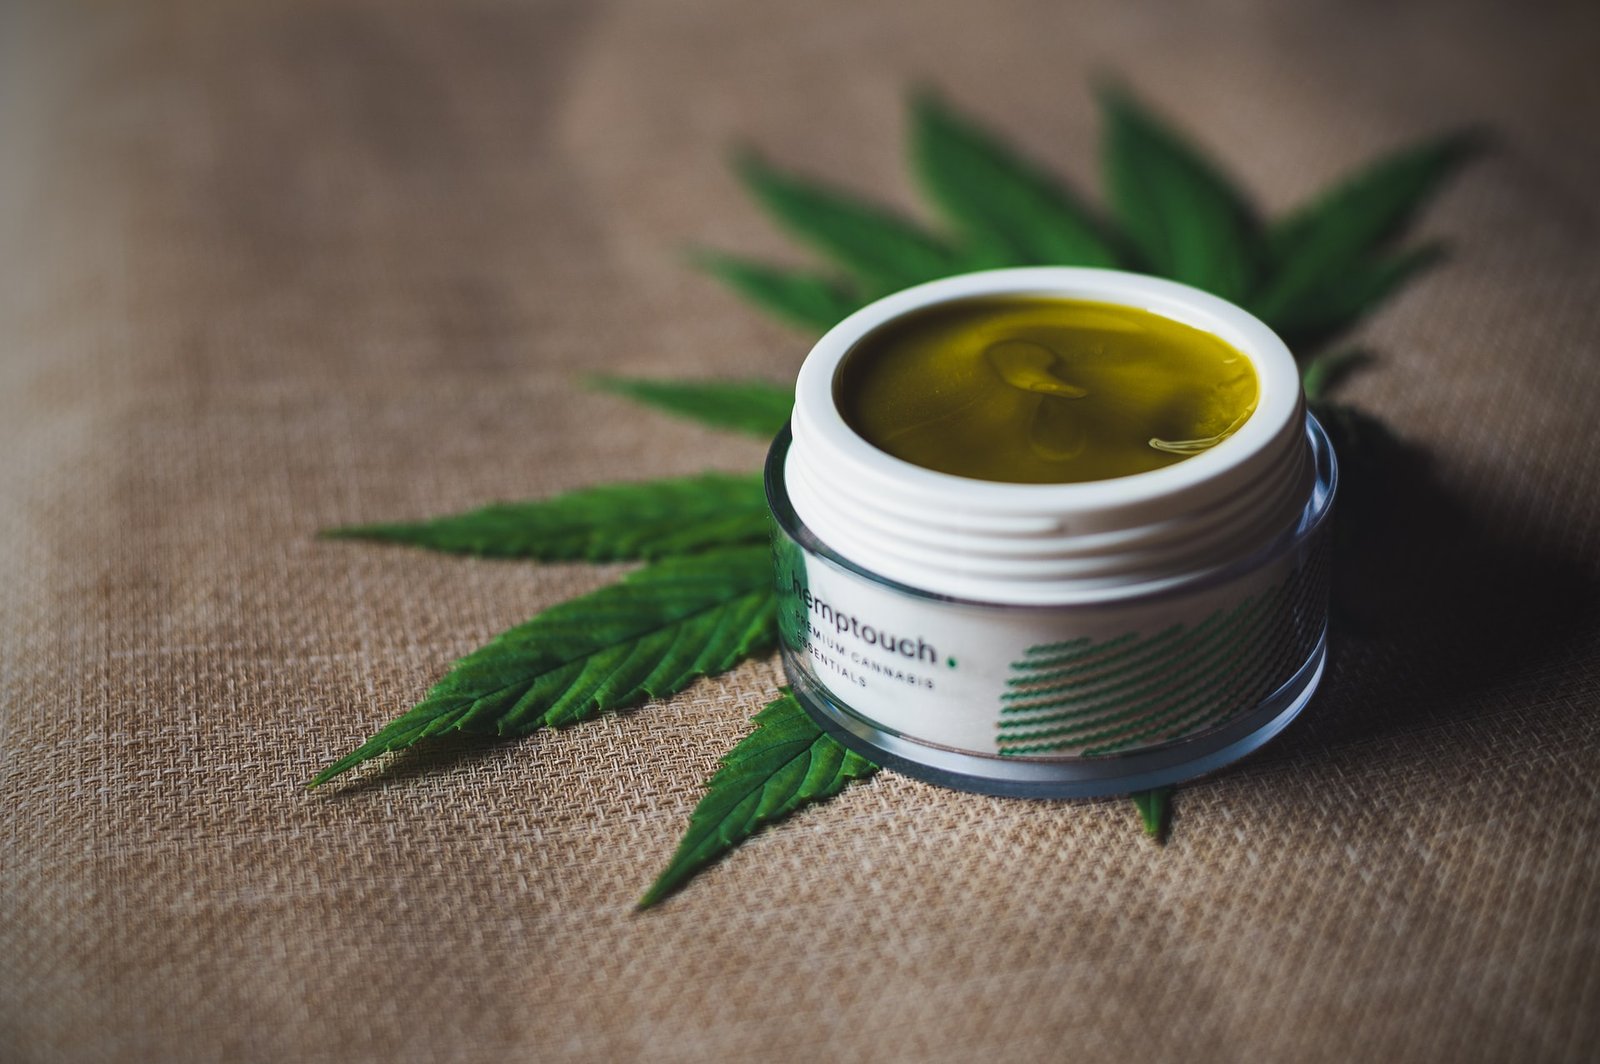 CBD Beauty Products That Won’t Leave You Stoned